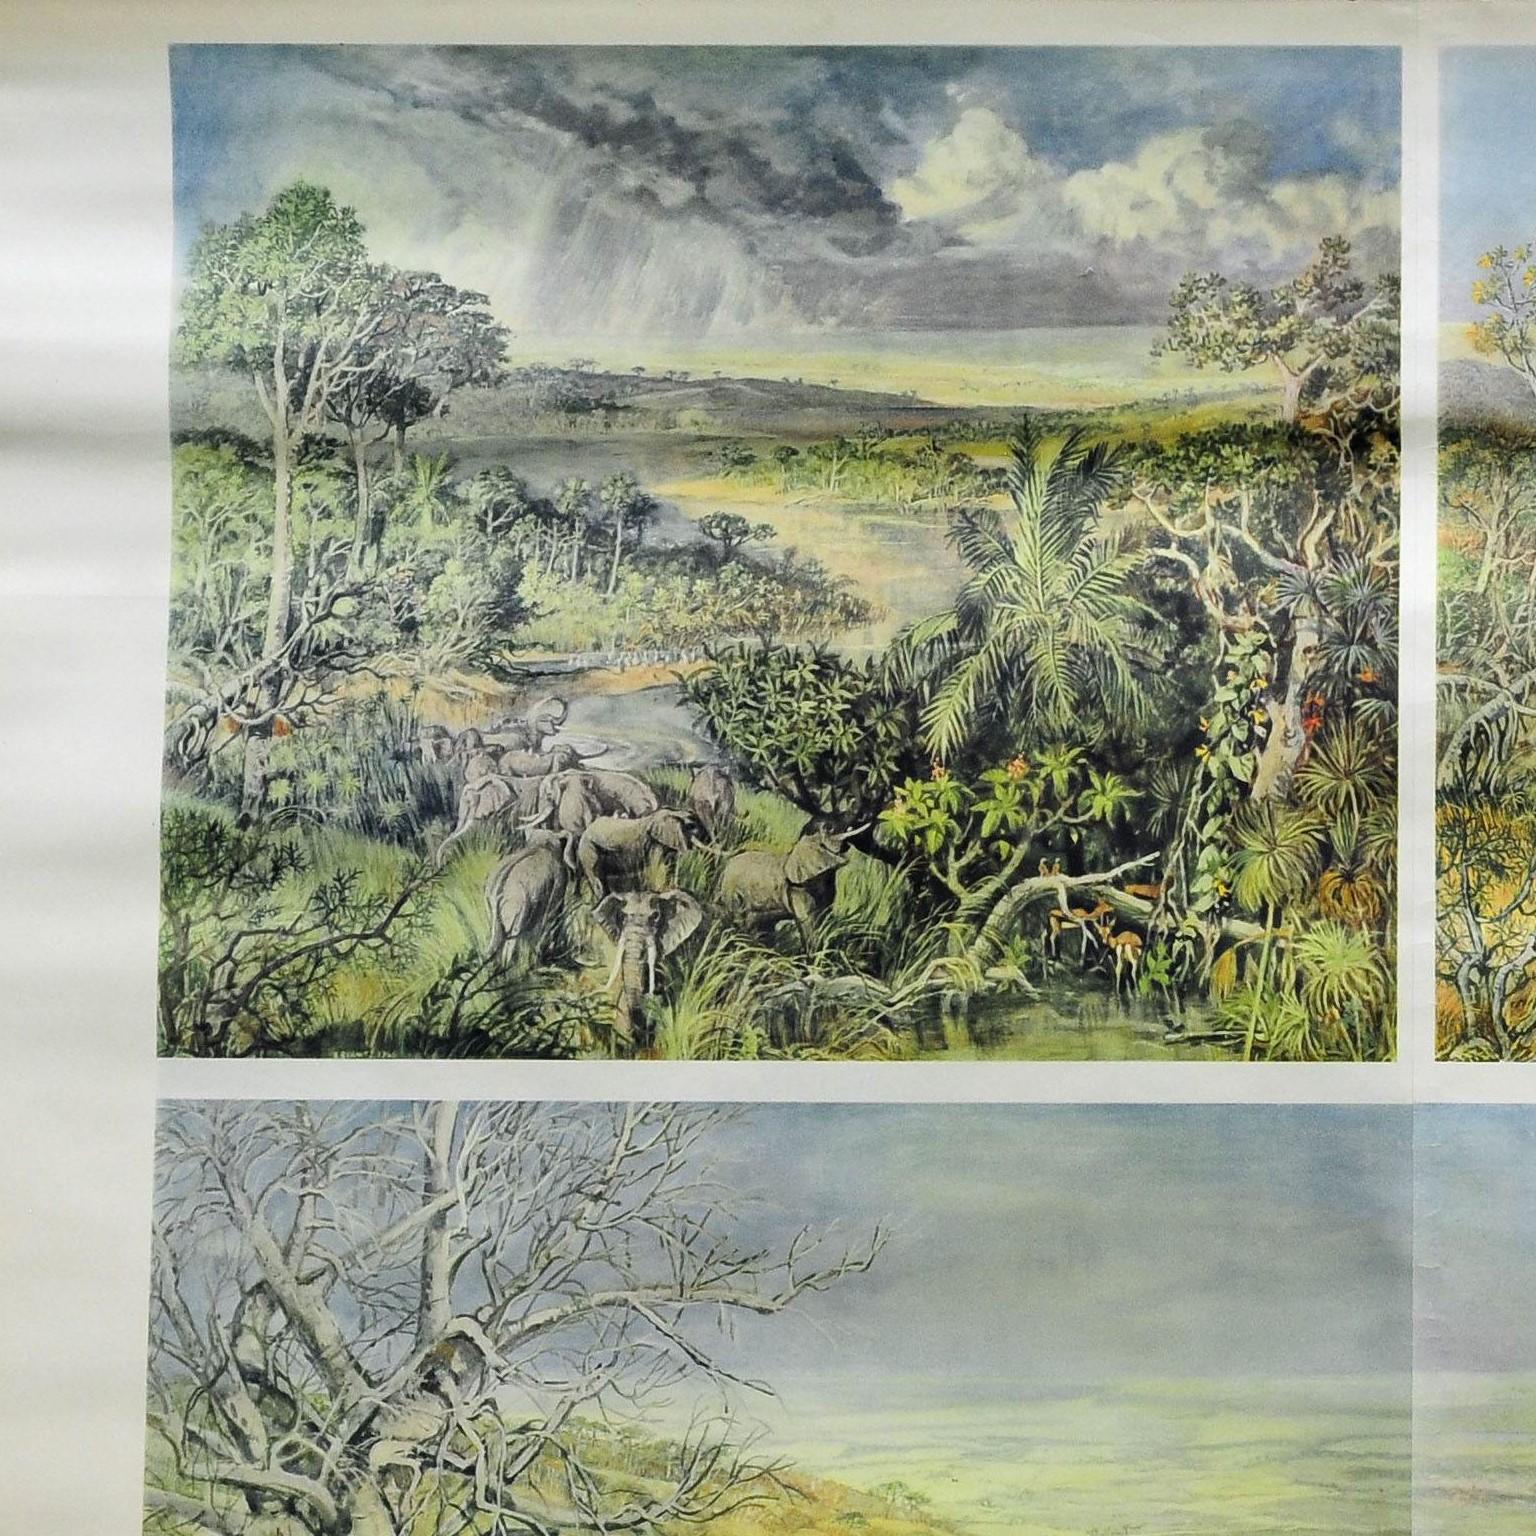 A countrycore pull-down wallchart illustrating the African savanna landscape during the yearly seasons (supported by climate graphs), cozyness wild animals (e.g. elephants) and farming life, published in GDR. Colorful print on paper reinforced with